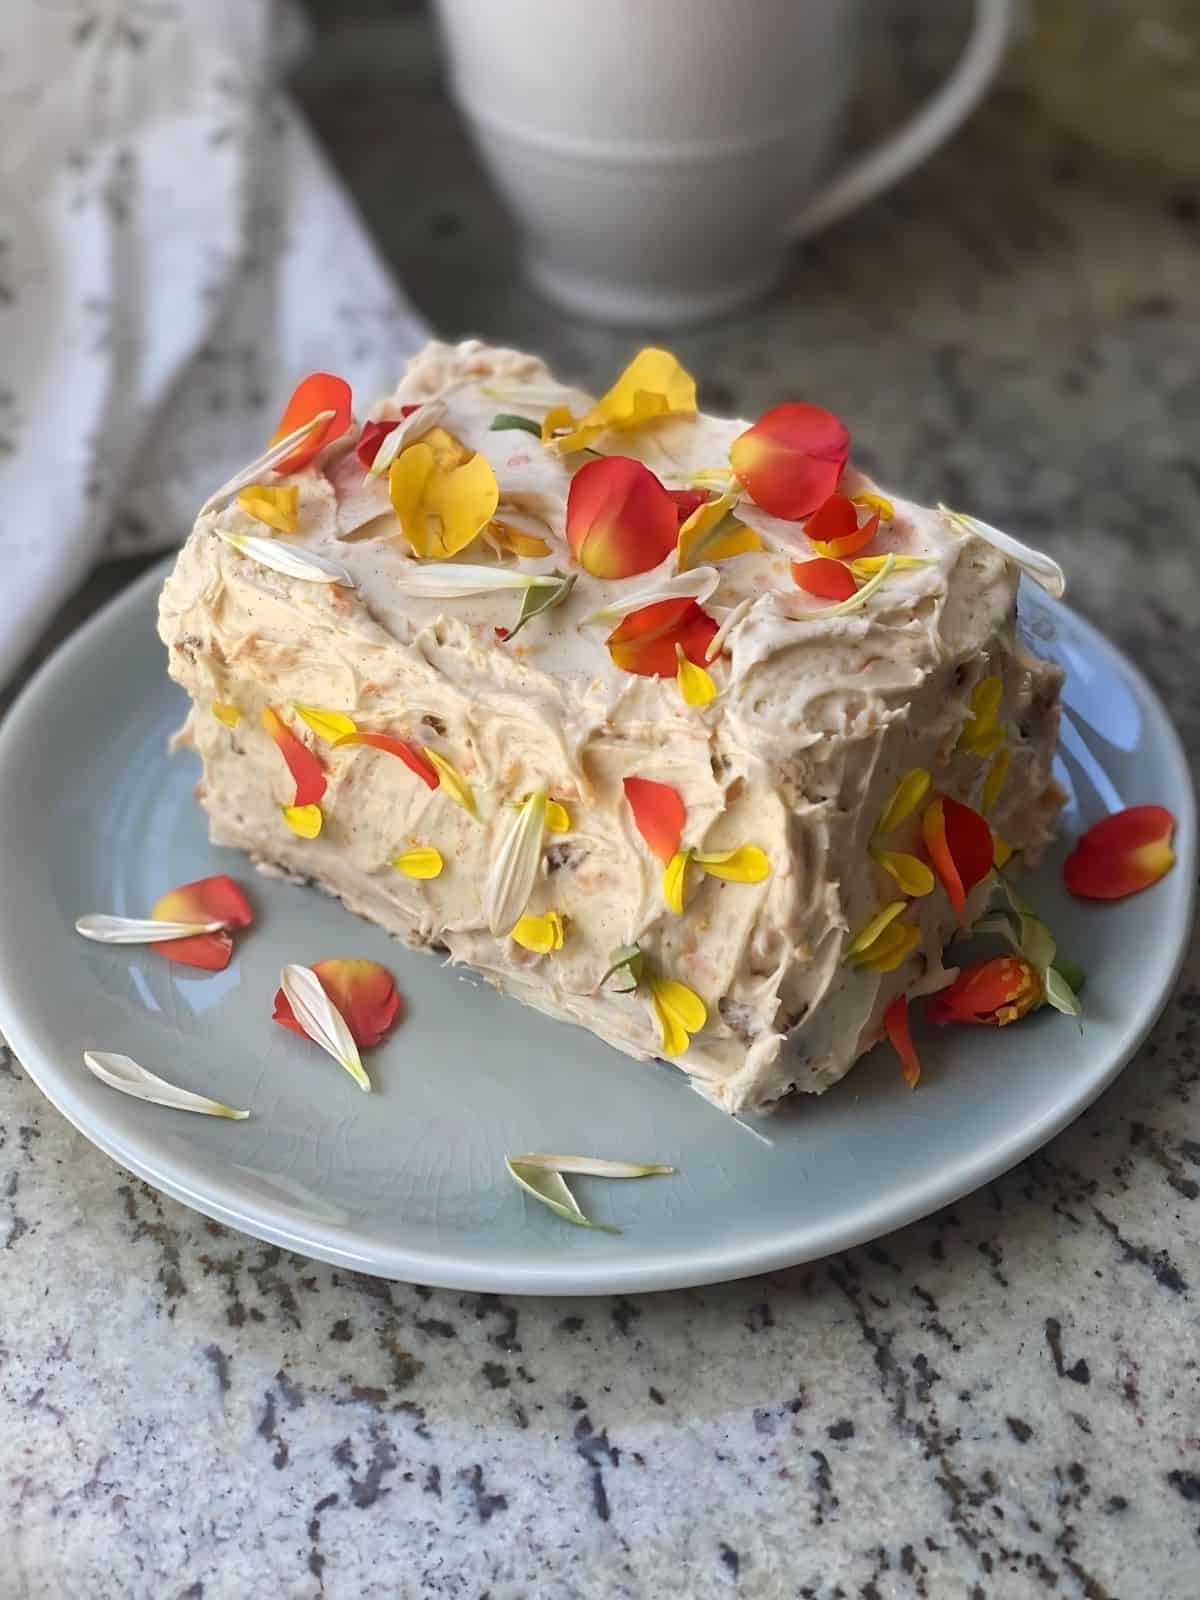 Carrot cake on a plate topped with fresh edible flowers.